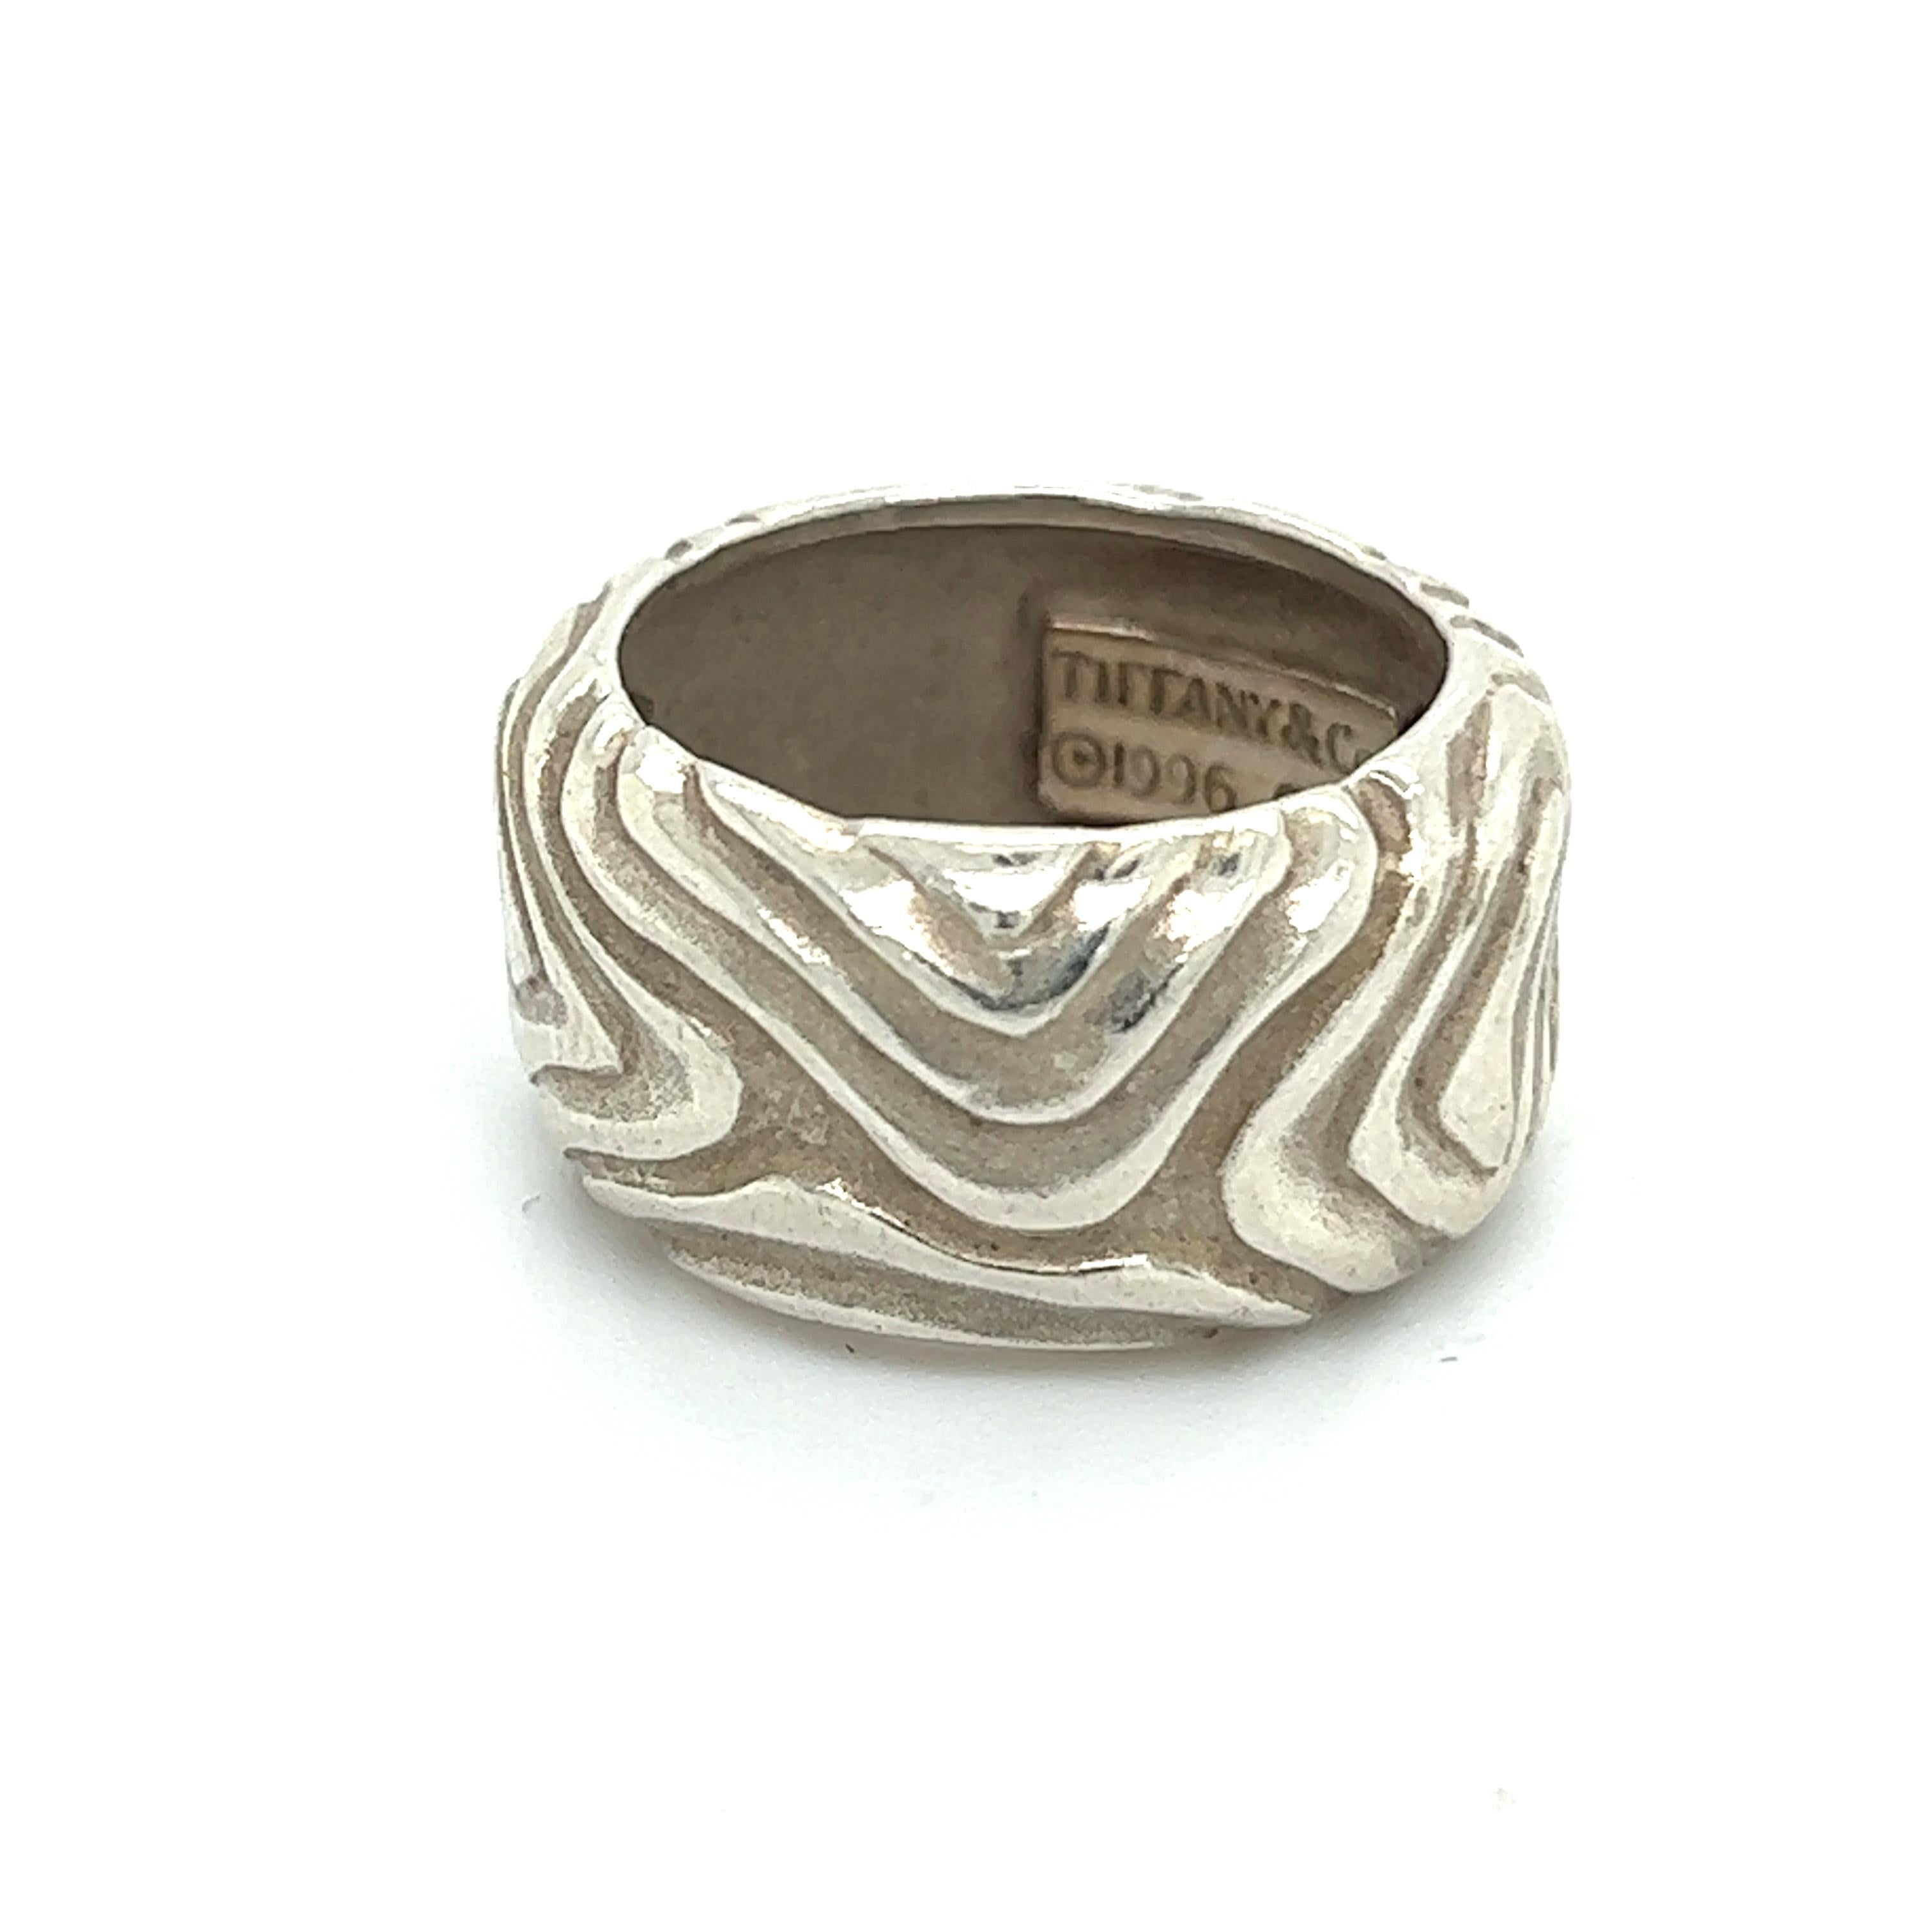 Authentic Tiffany & Co Estate Woodgrain Design Ring 4.5 Silver 11 mm 5.7 Grams TIF630

TRUSTED SELLER SINCE 2002

DETAIL
Design: Woodgrain
Ring Size: 4.5
Height: 11 mm
Weight: 5.7 Grams
Metal: Sterling Silver

We try to present our estate items as